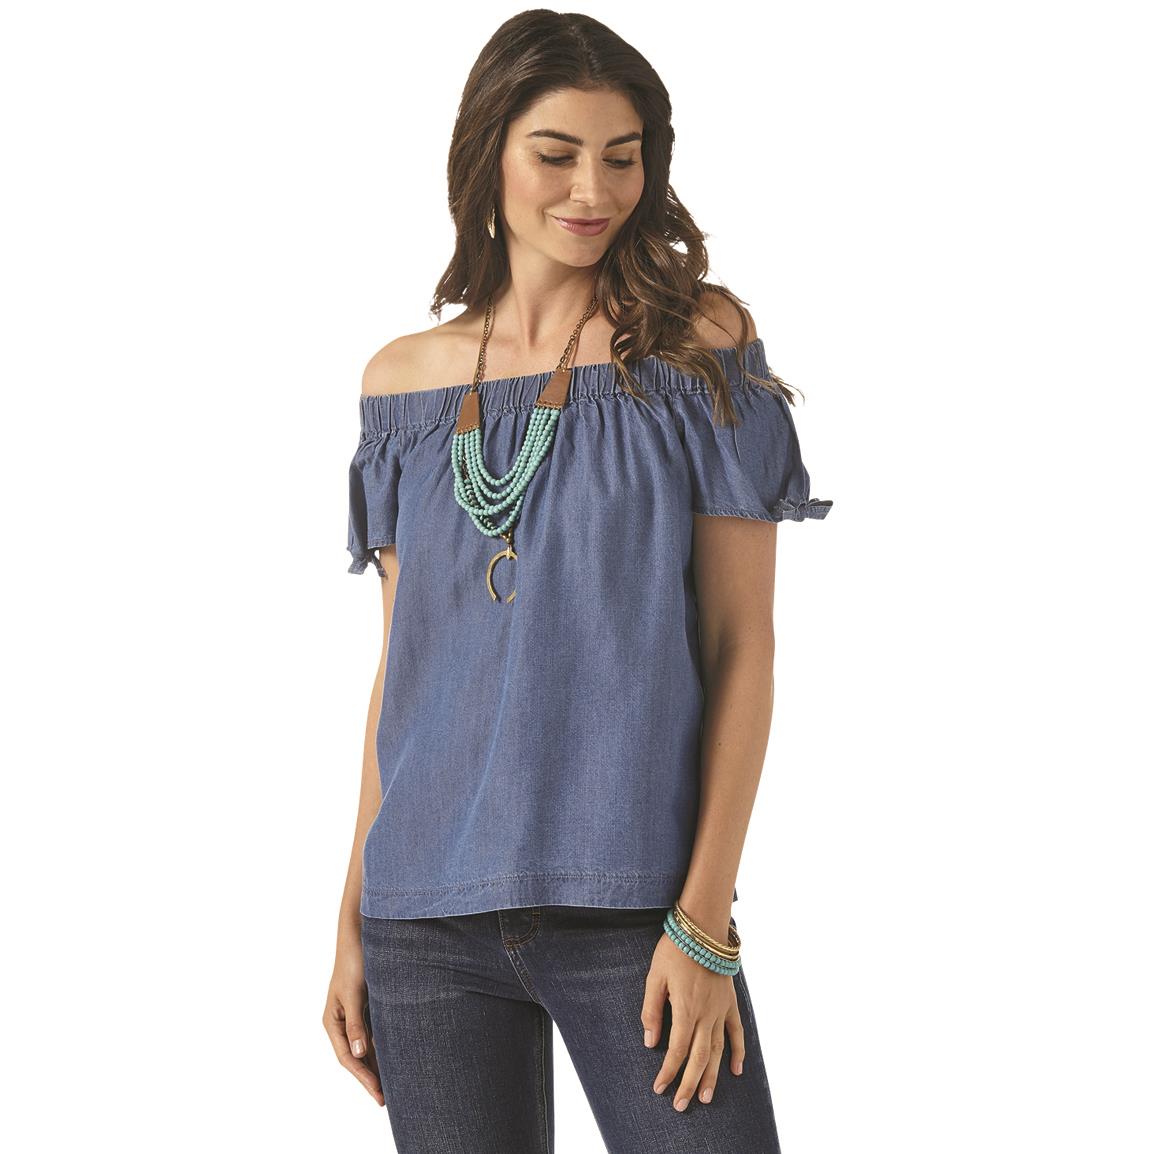 Wrangler Women's Off-the-Shoulder Top with Knot Sleeves, Chambray